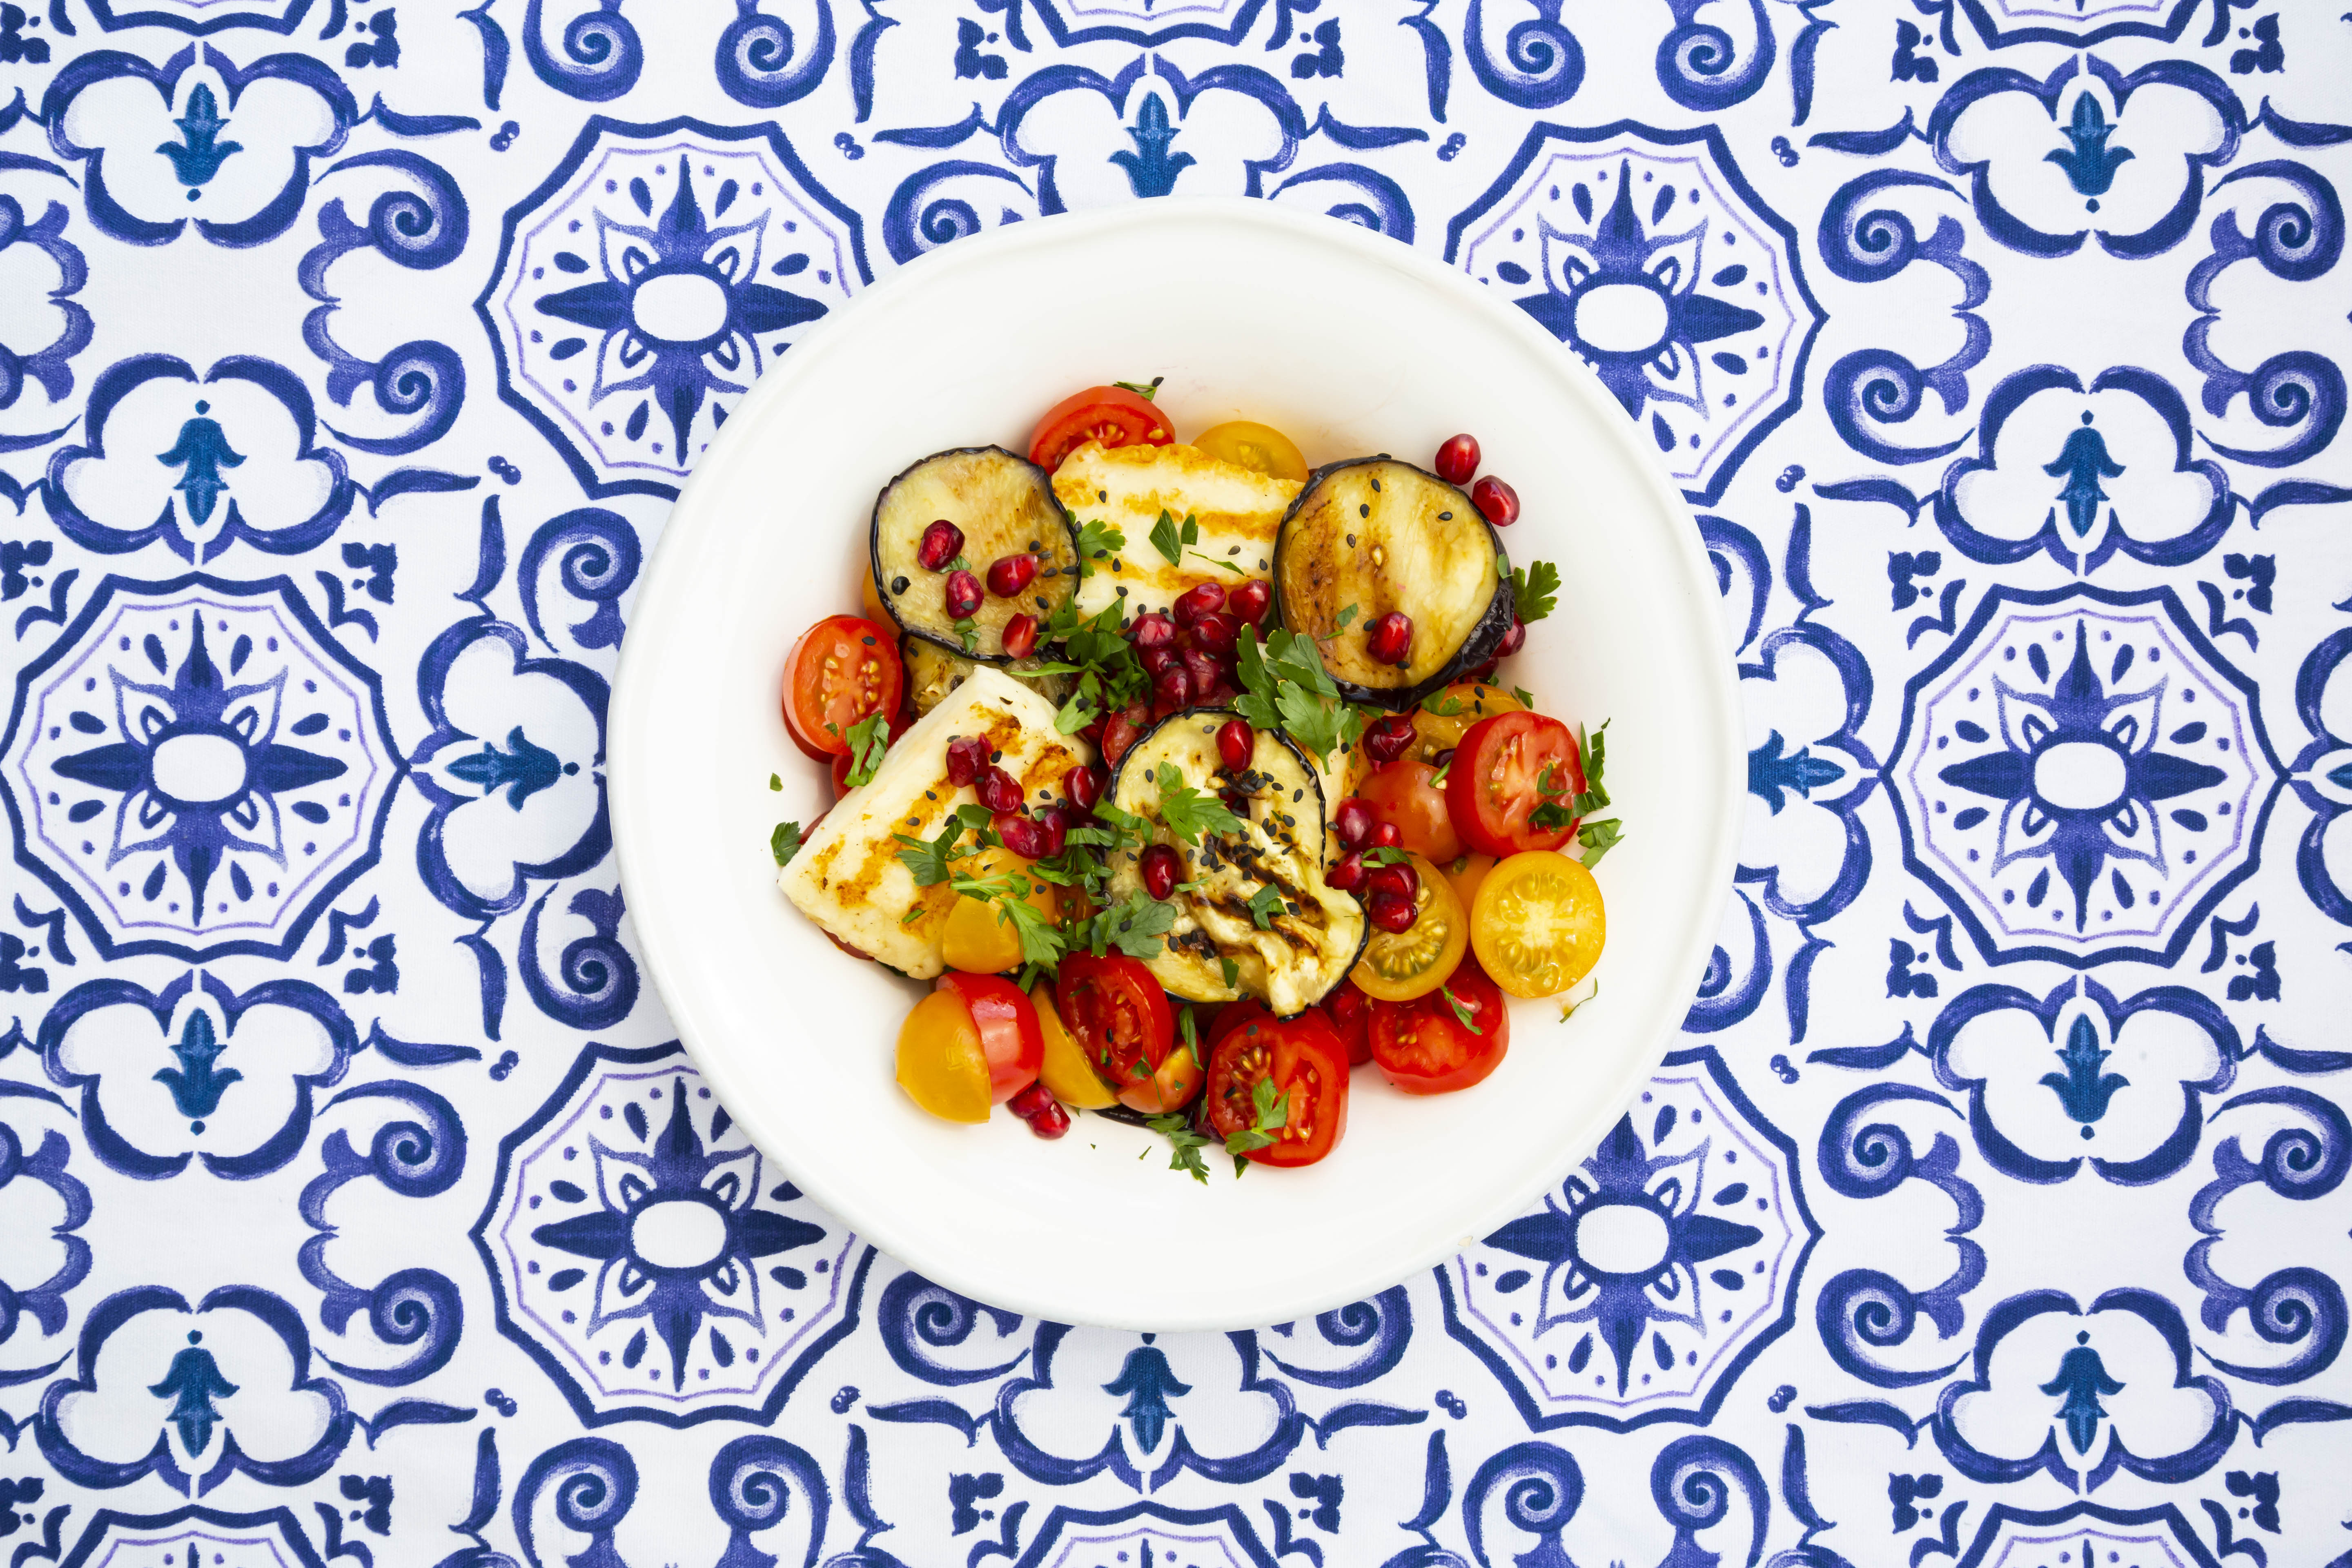 A plate of zucchini, tomato, and halloumi salad, set on blue and white tiles.